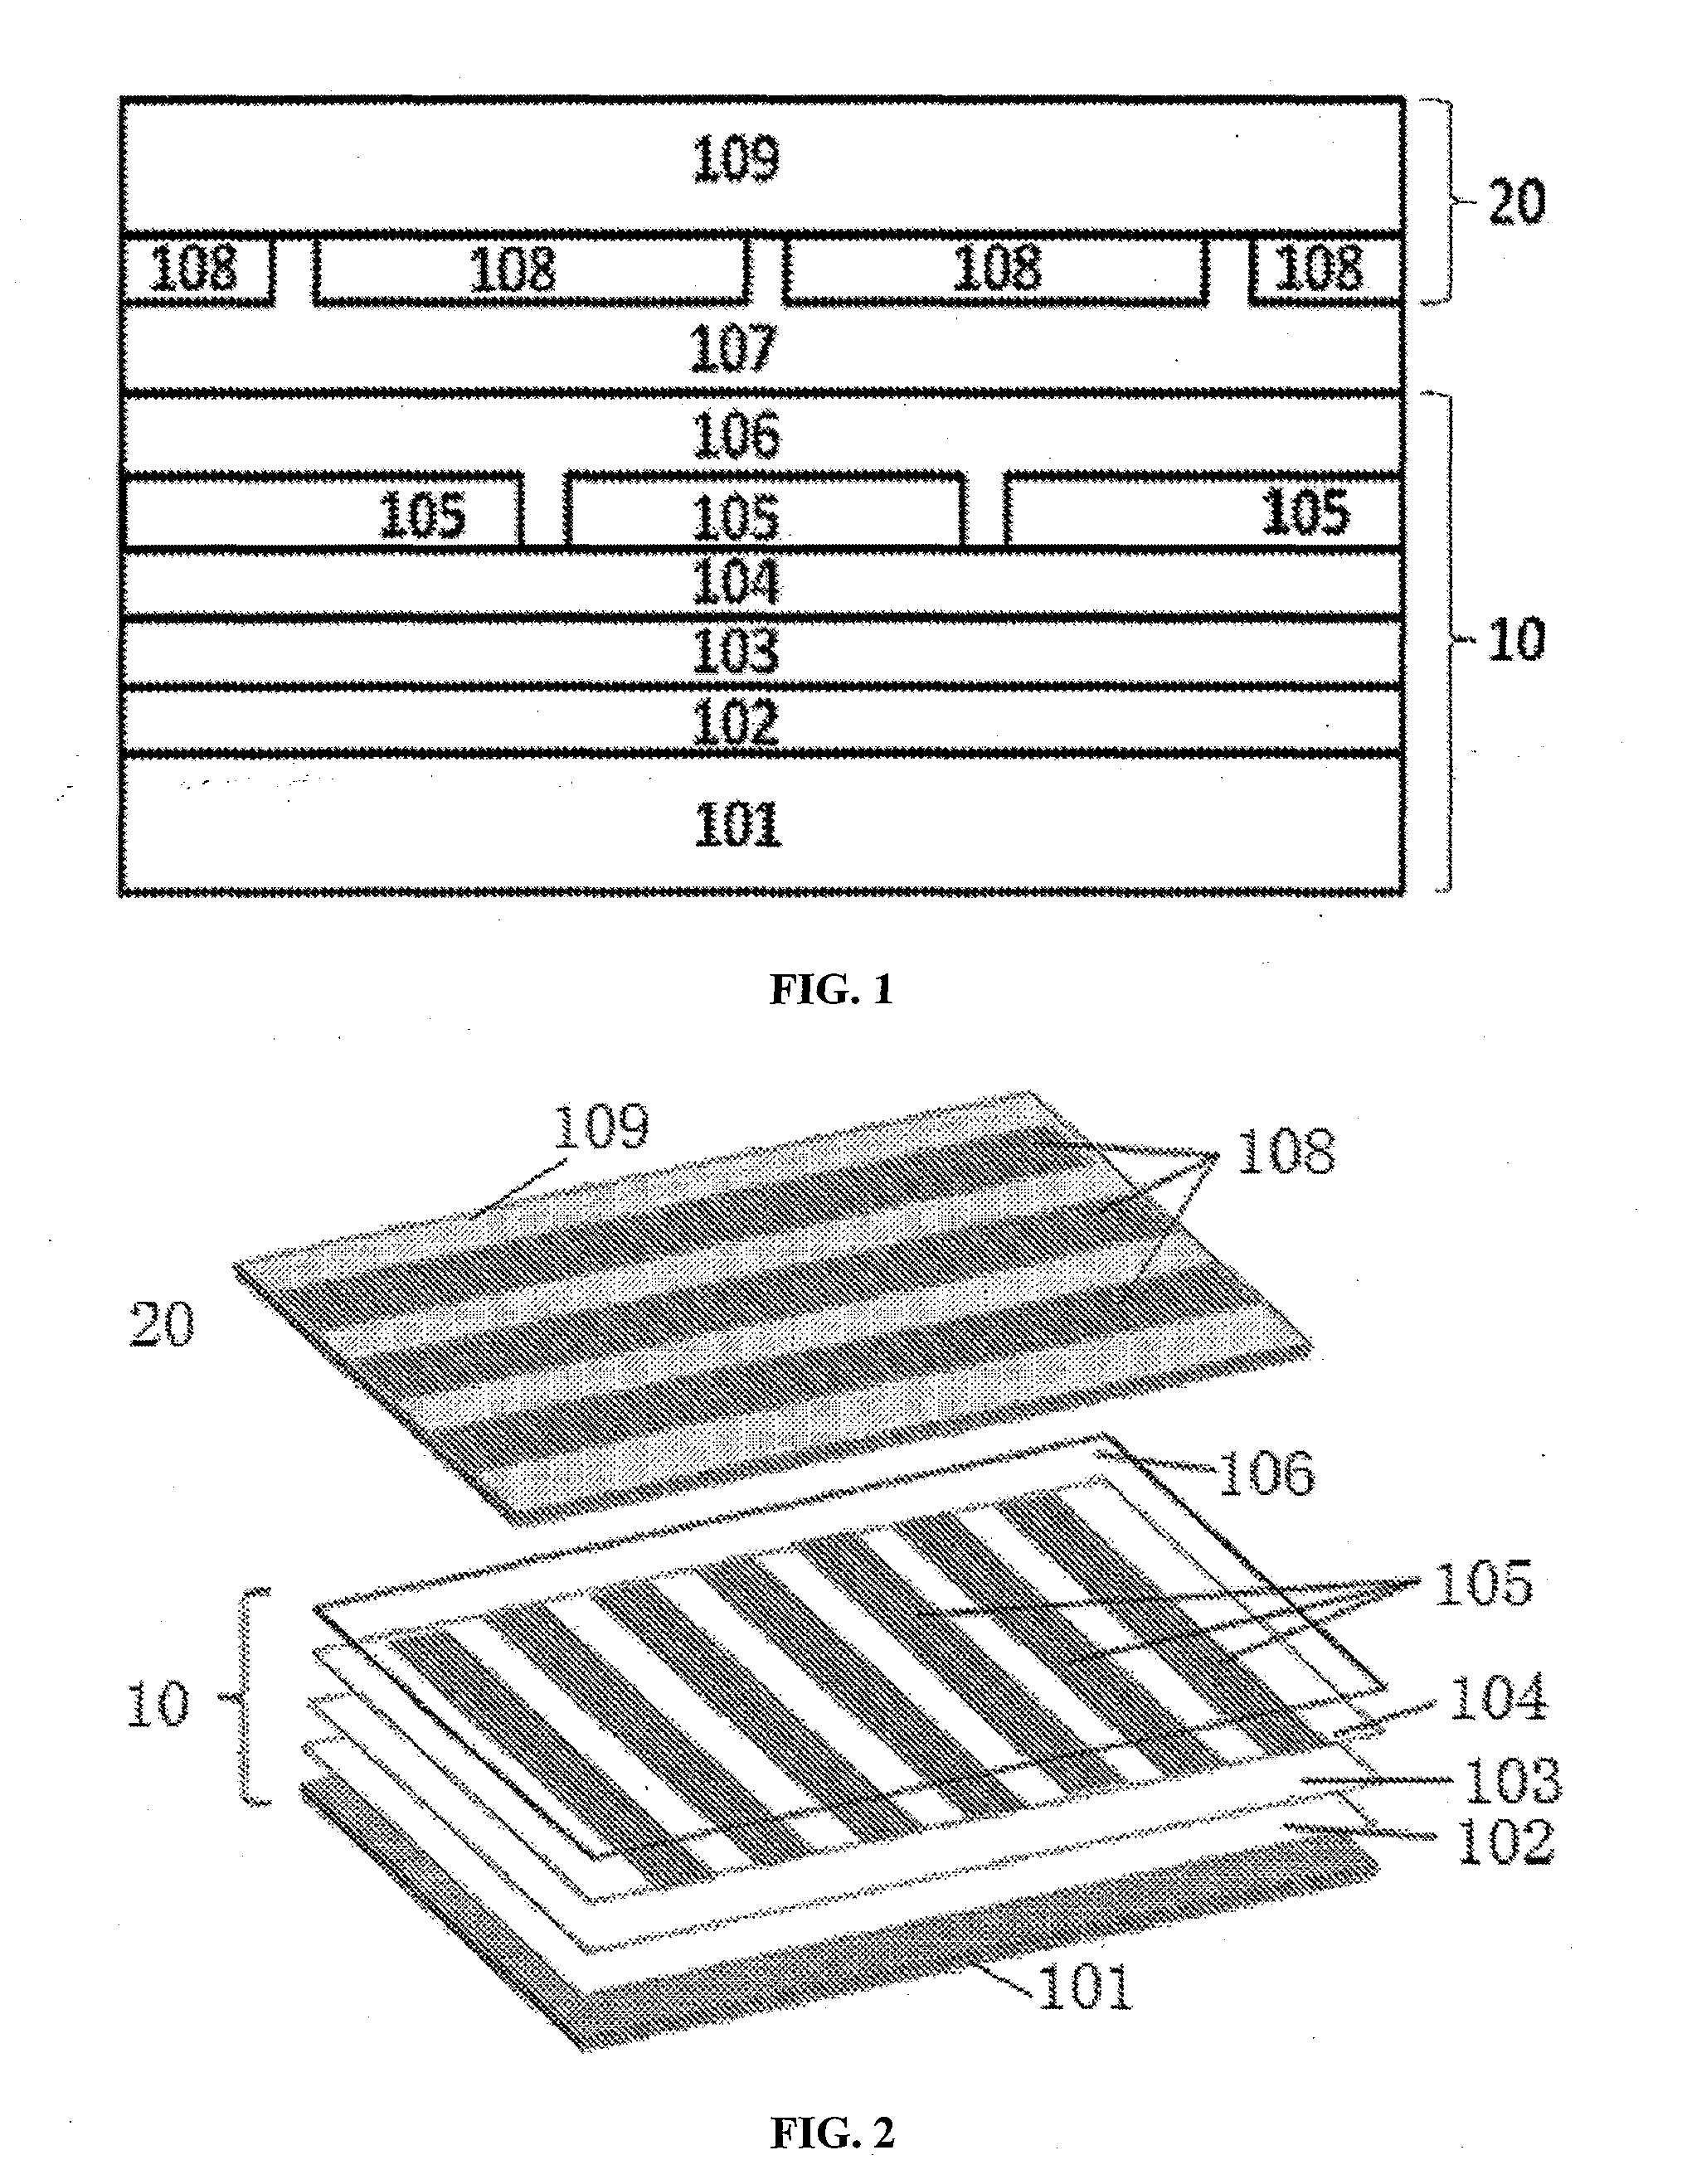 Touch control structure of an amoled display screen